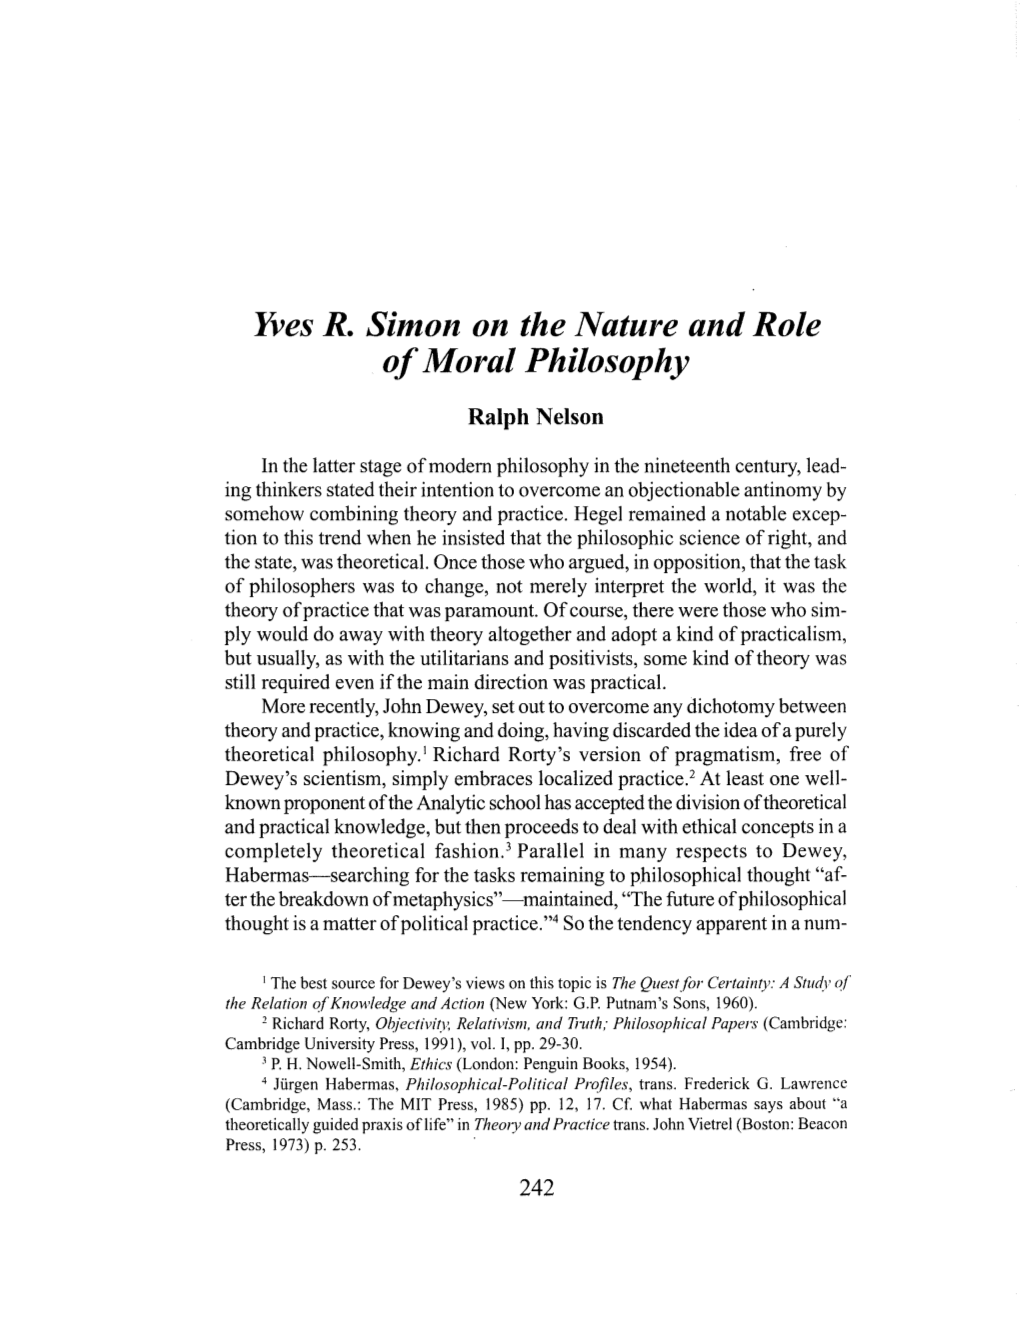 Yves R. Simon on the Nature and Role of Moral Philosophy / Ralph